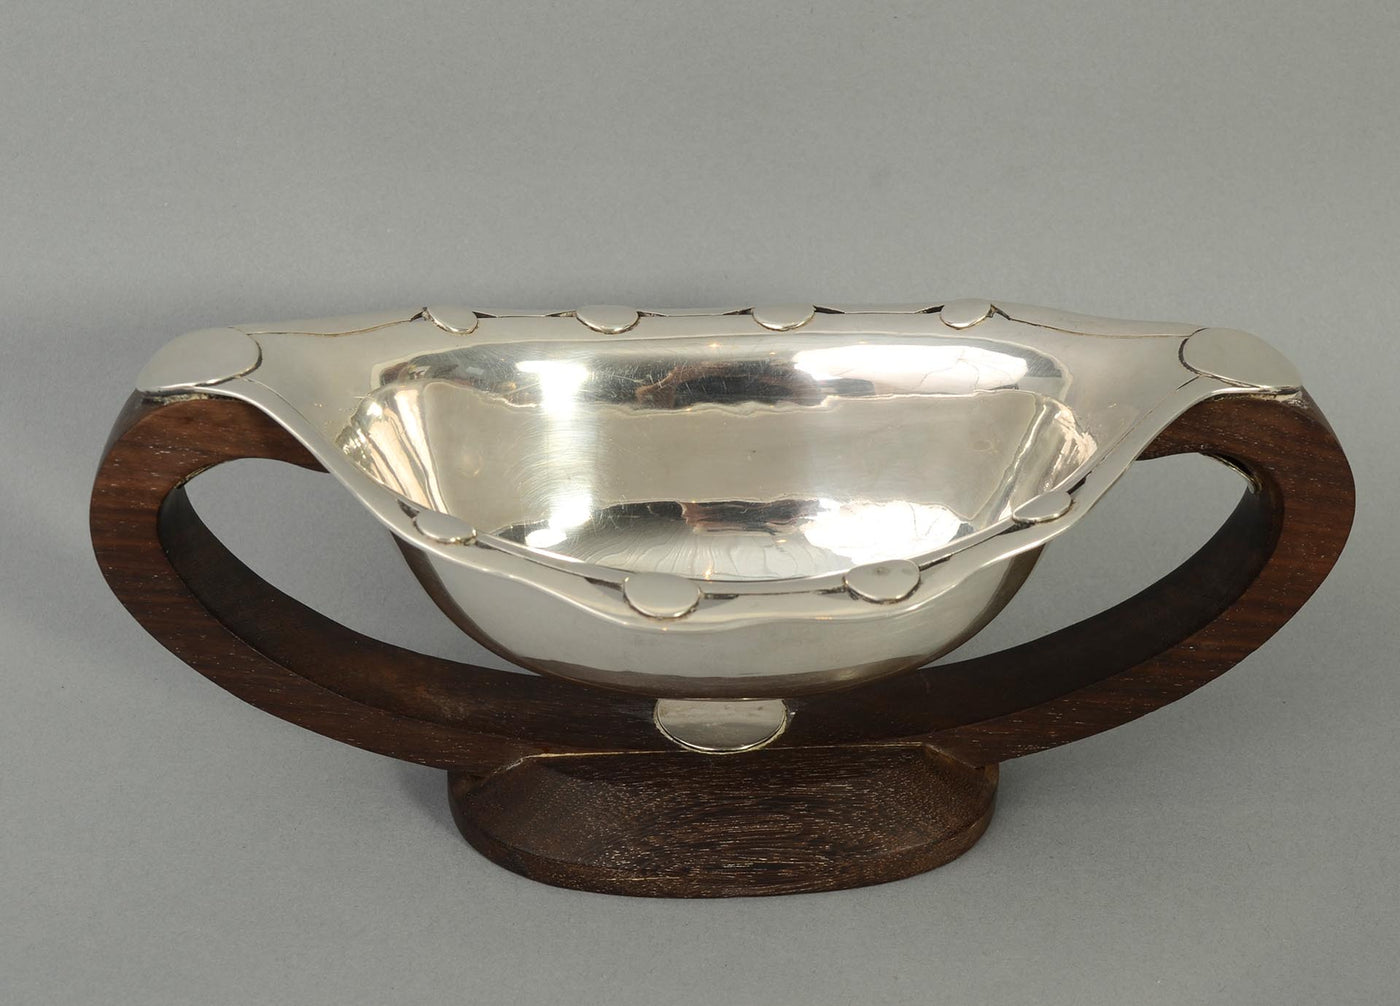 william-spratling-sterling-silver-sauce-boat-1402279-219-3-top-view